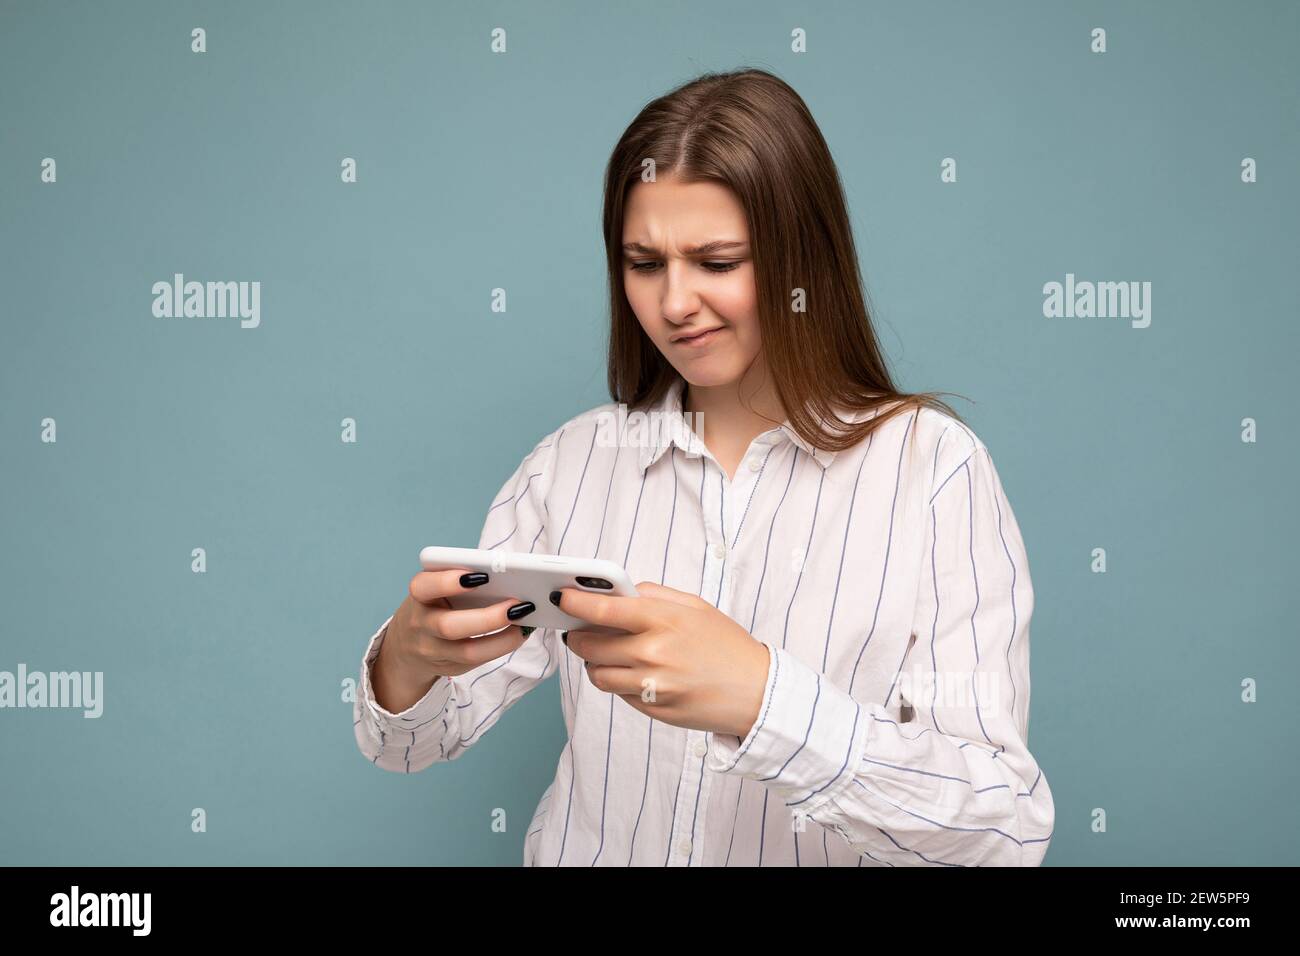 Concentrated attractive young blonde woman wearing casual white shirt isolated over blue background wall holding smartphone and playing online games Stock Photo